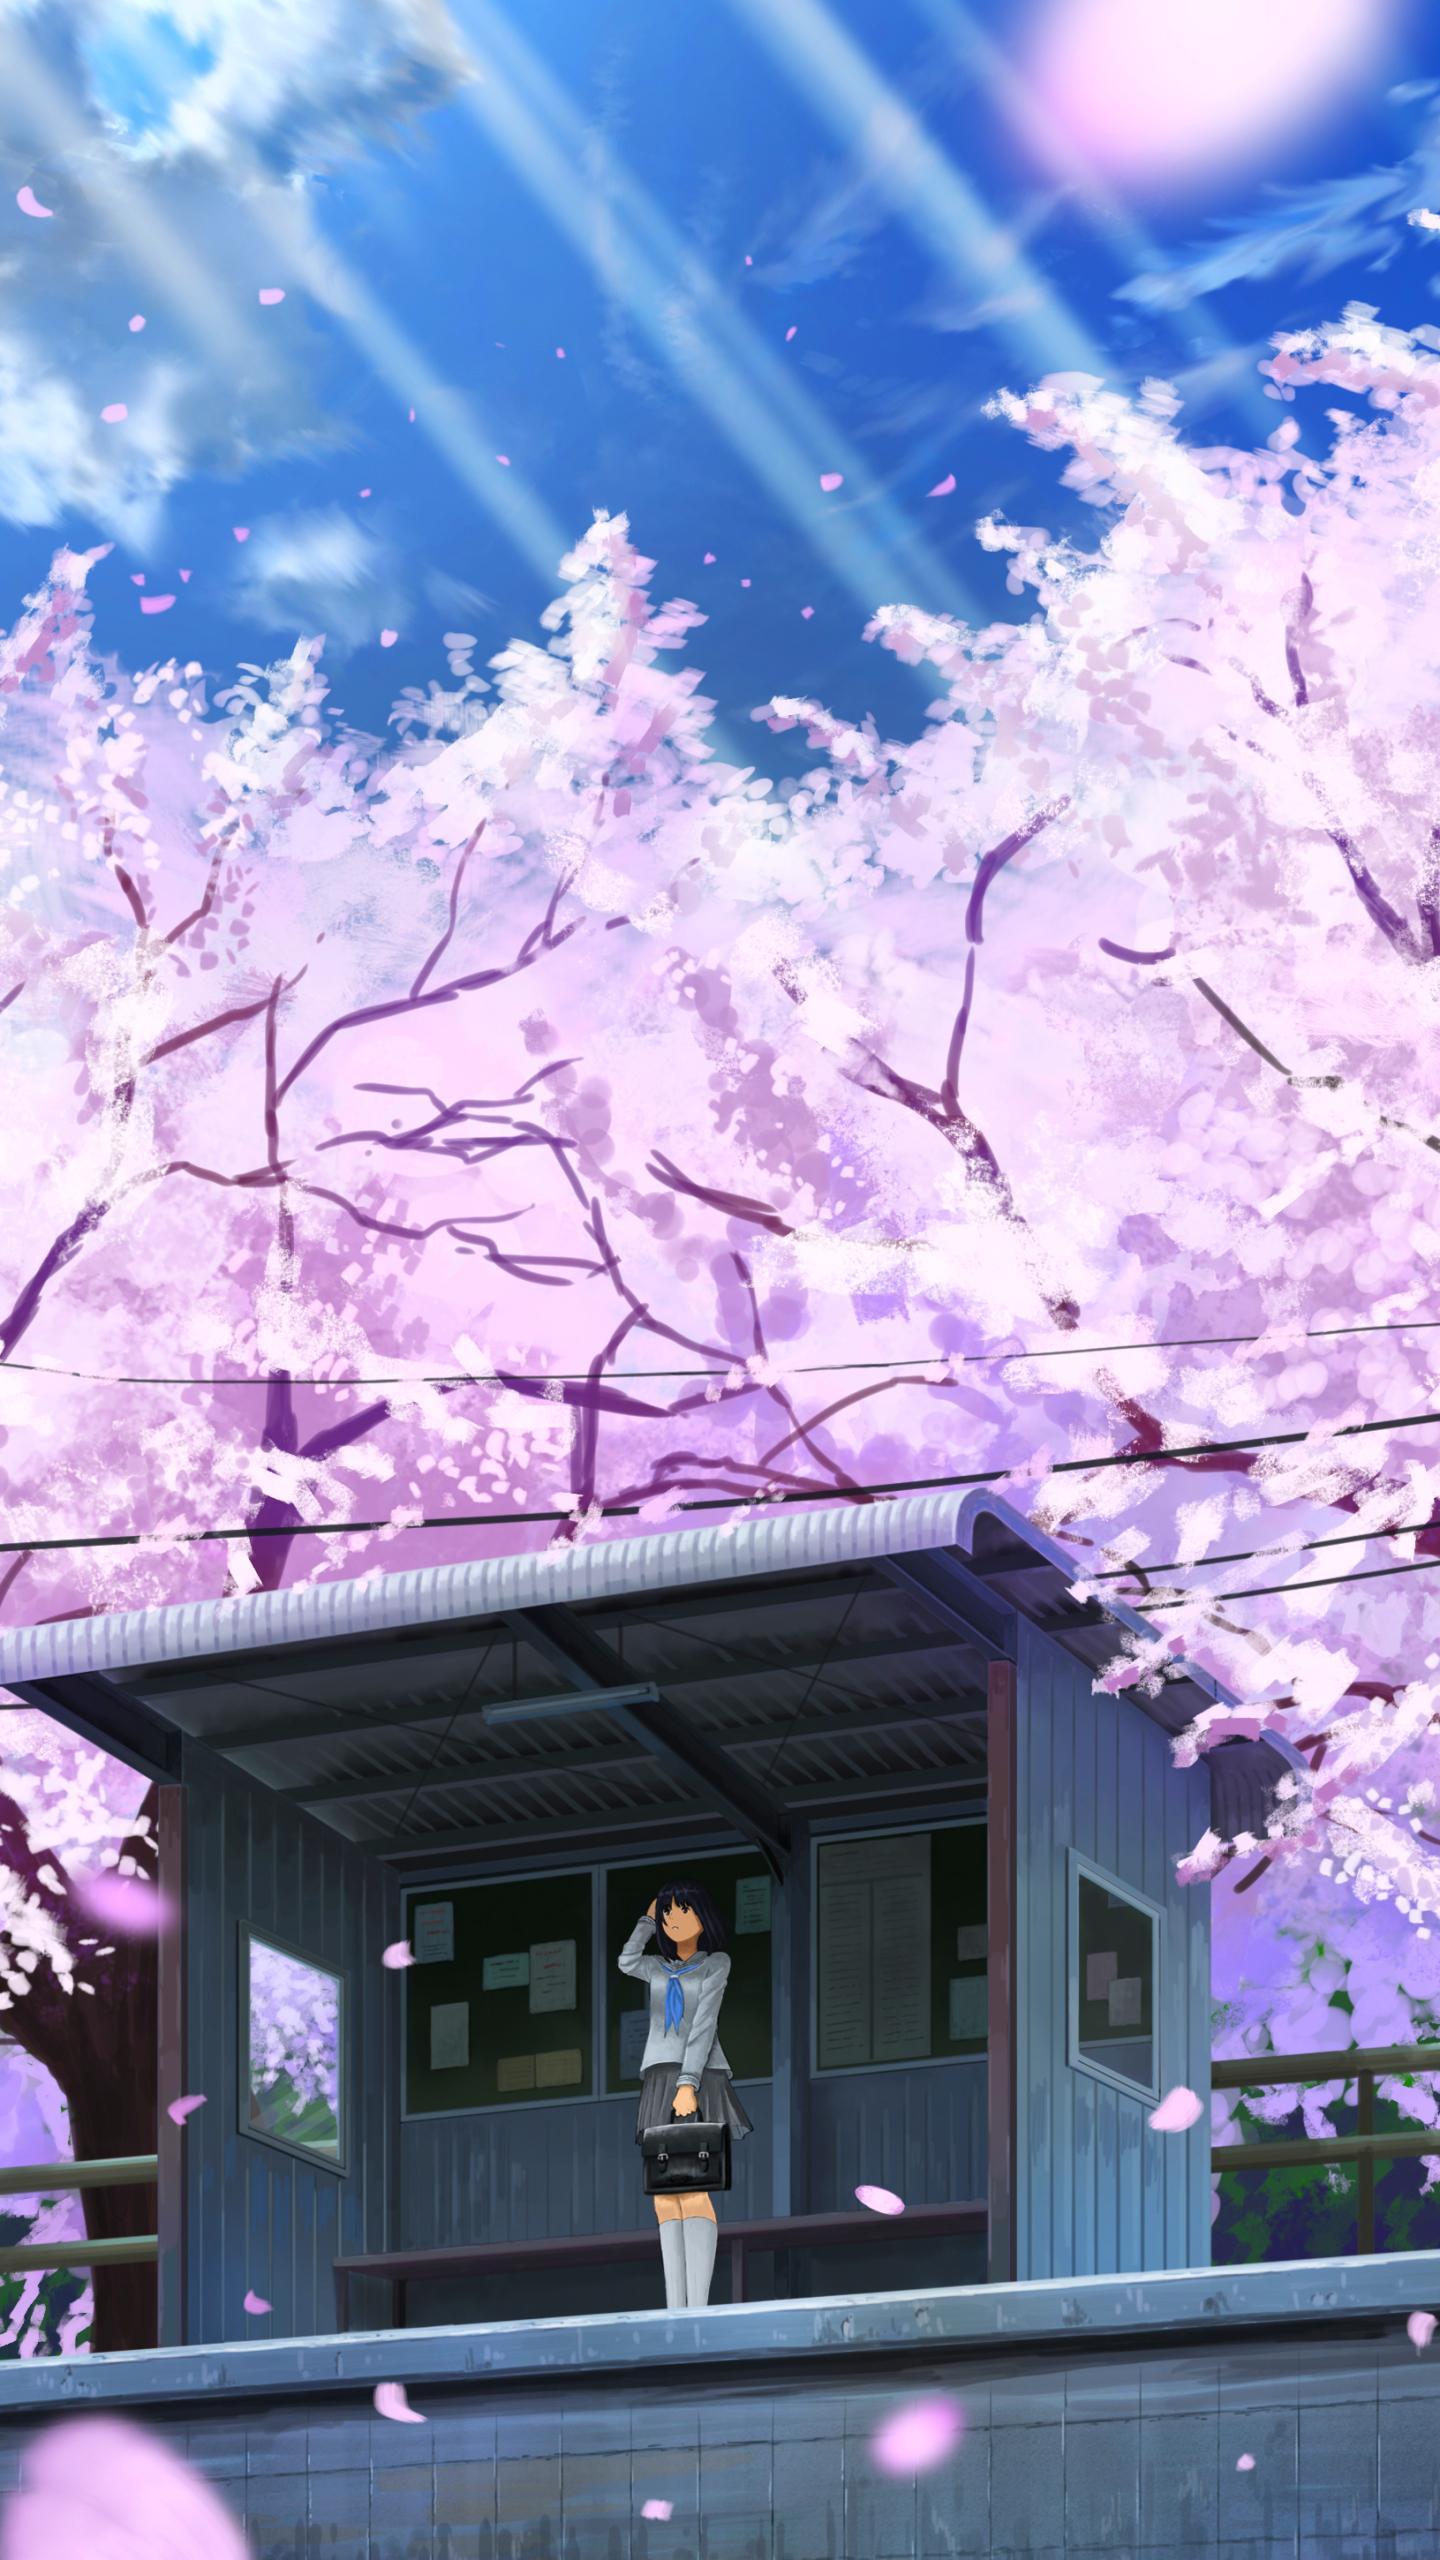 Download Enjoy the beauty of a cherry blossomfilled landscape with this  peaceful anime scenery Wallpaper  Wallpaperscom